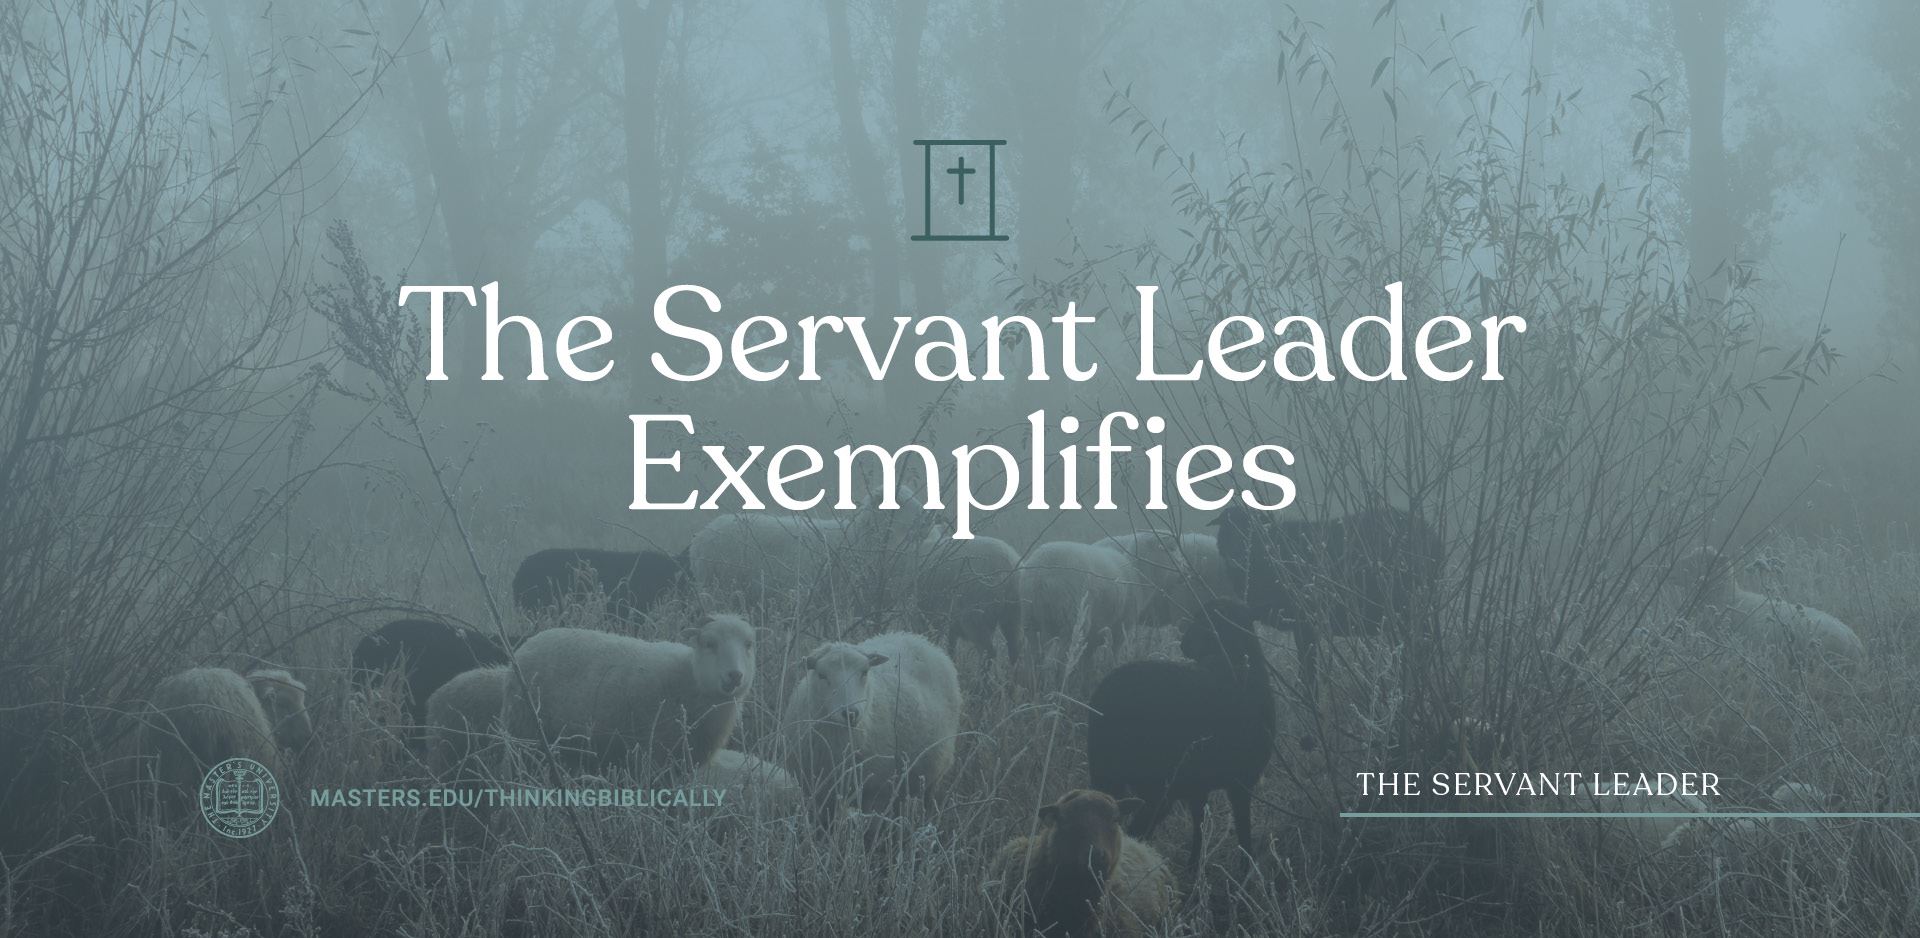 The Servant Leader Exemplifies Featured Image